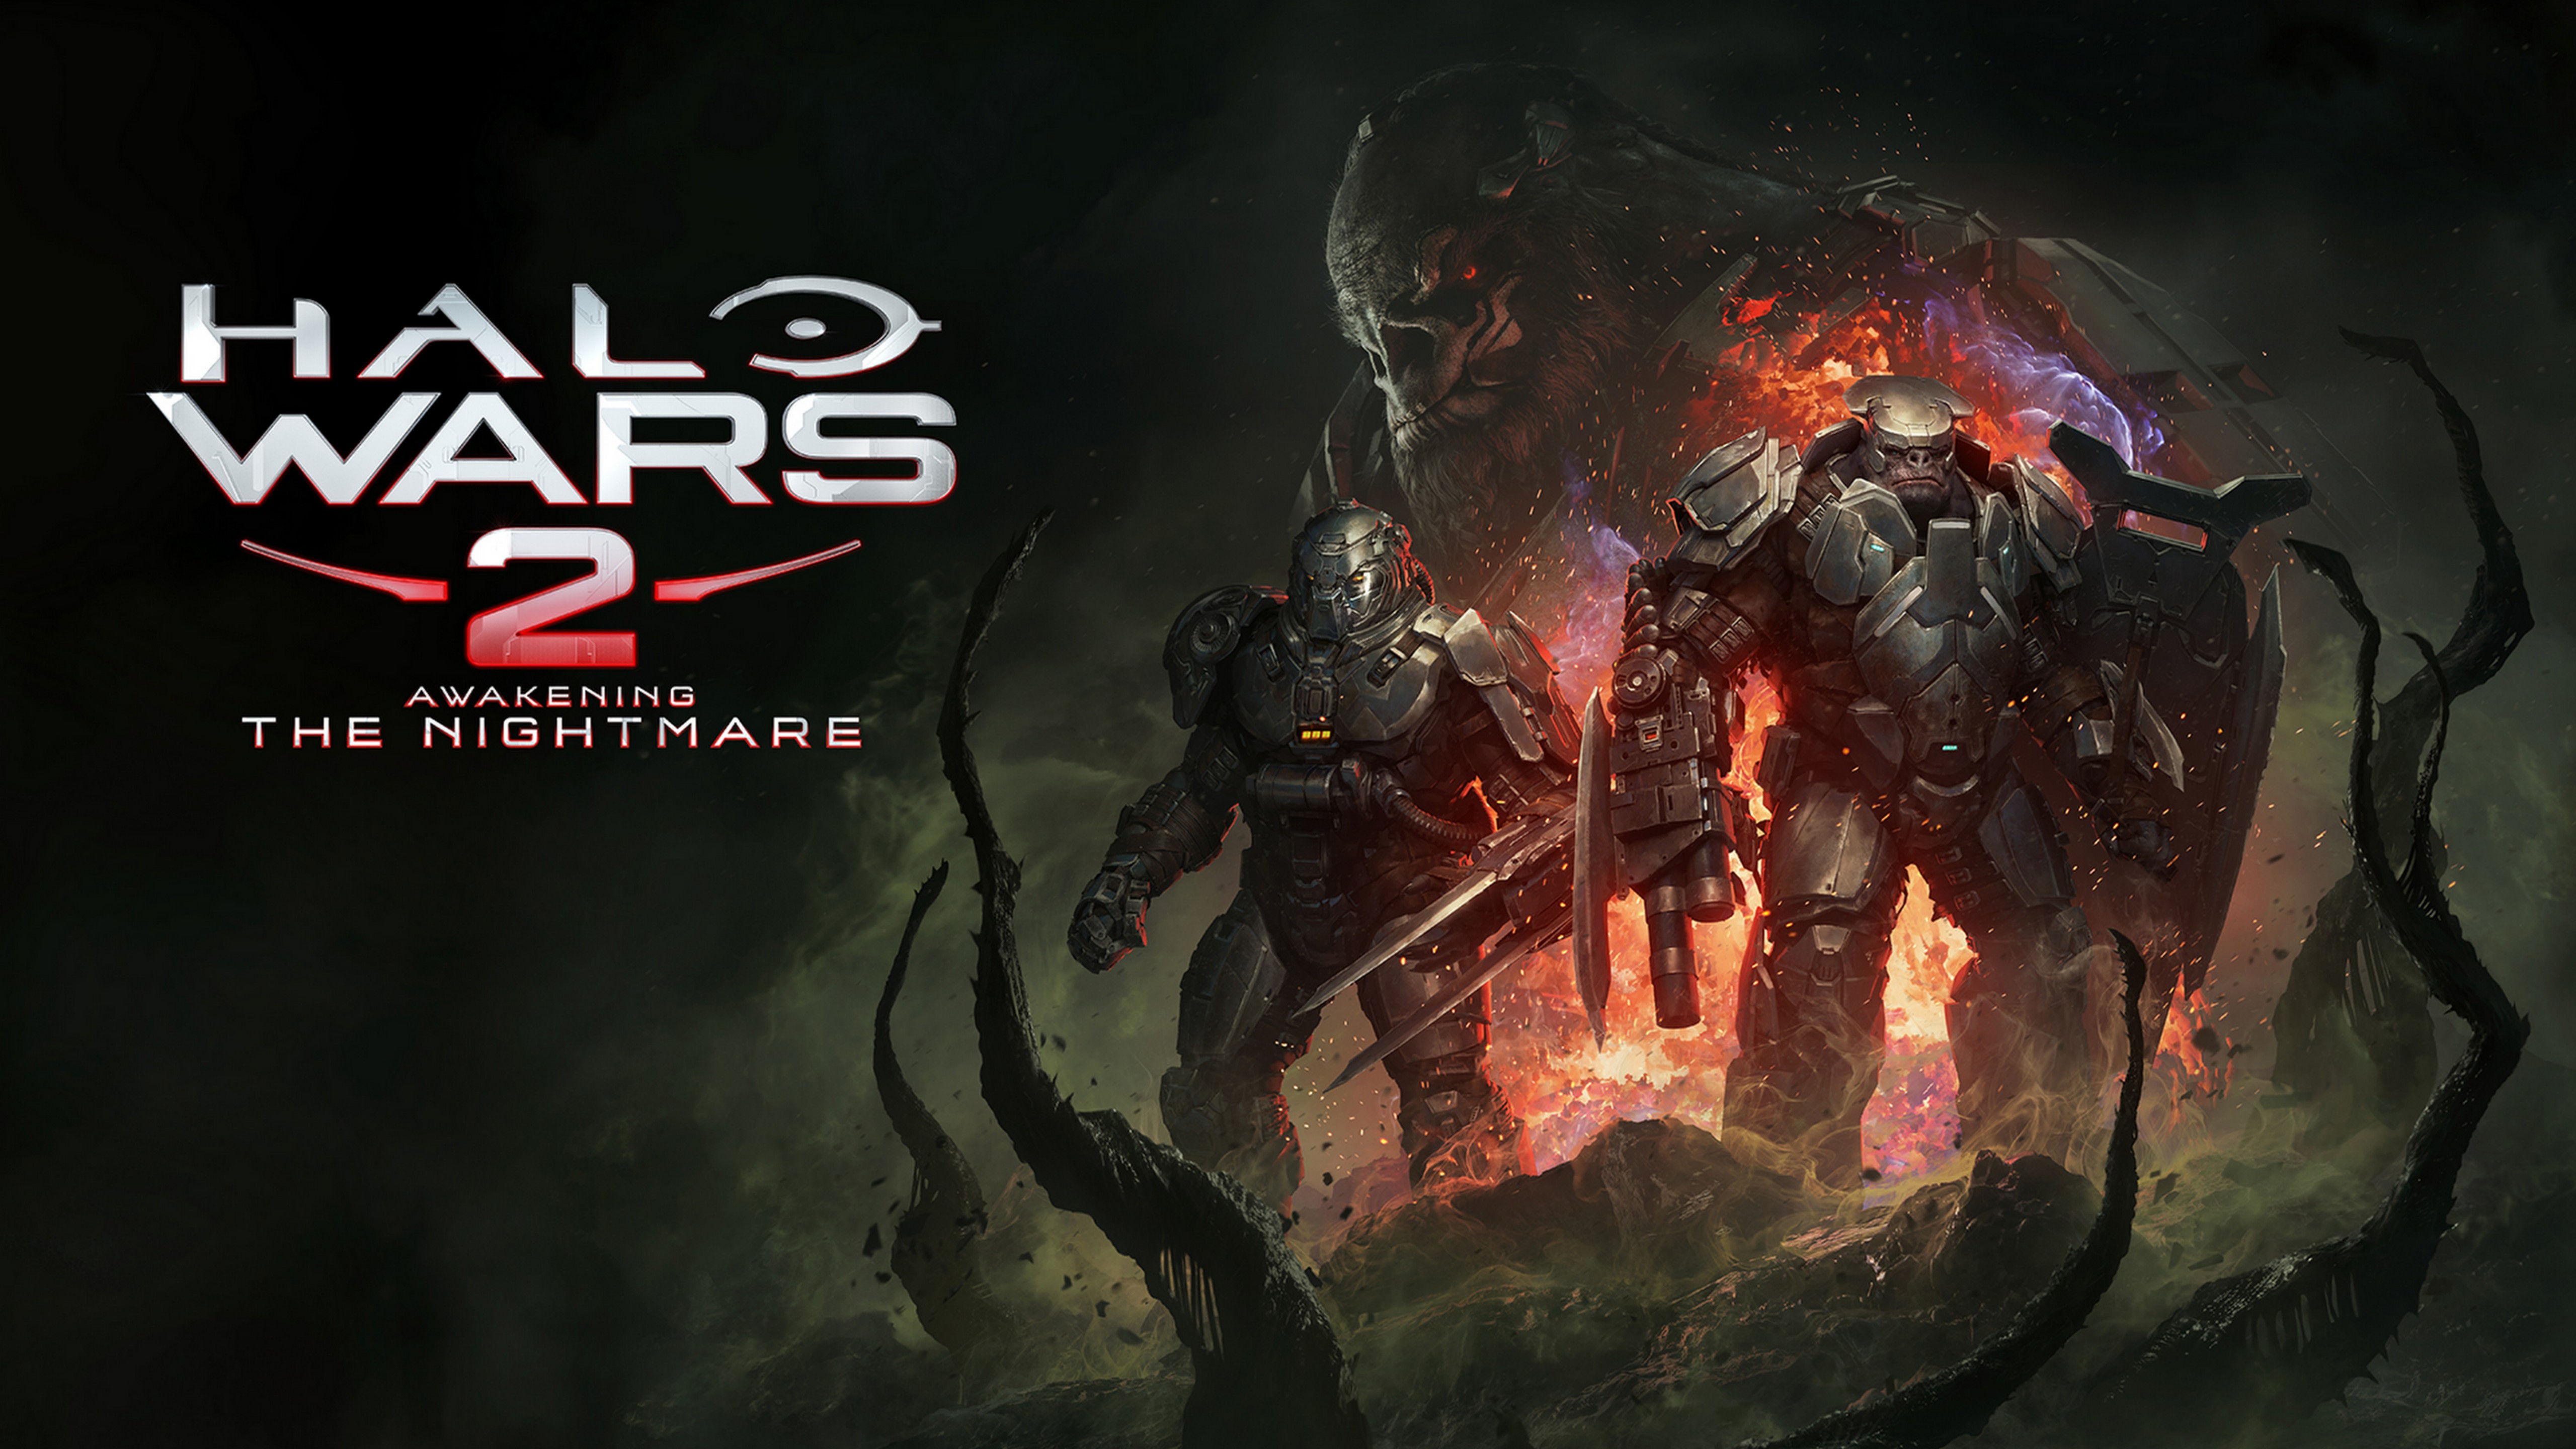 Halo Wars 2: Awakening the Nightmare, a full DLC expansion coming to Xbox Play Anywhere title Halo Wars 2 in Fall 2017